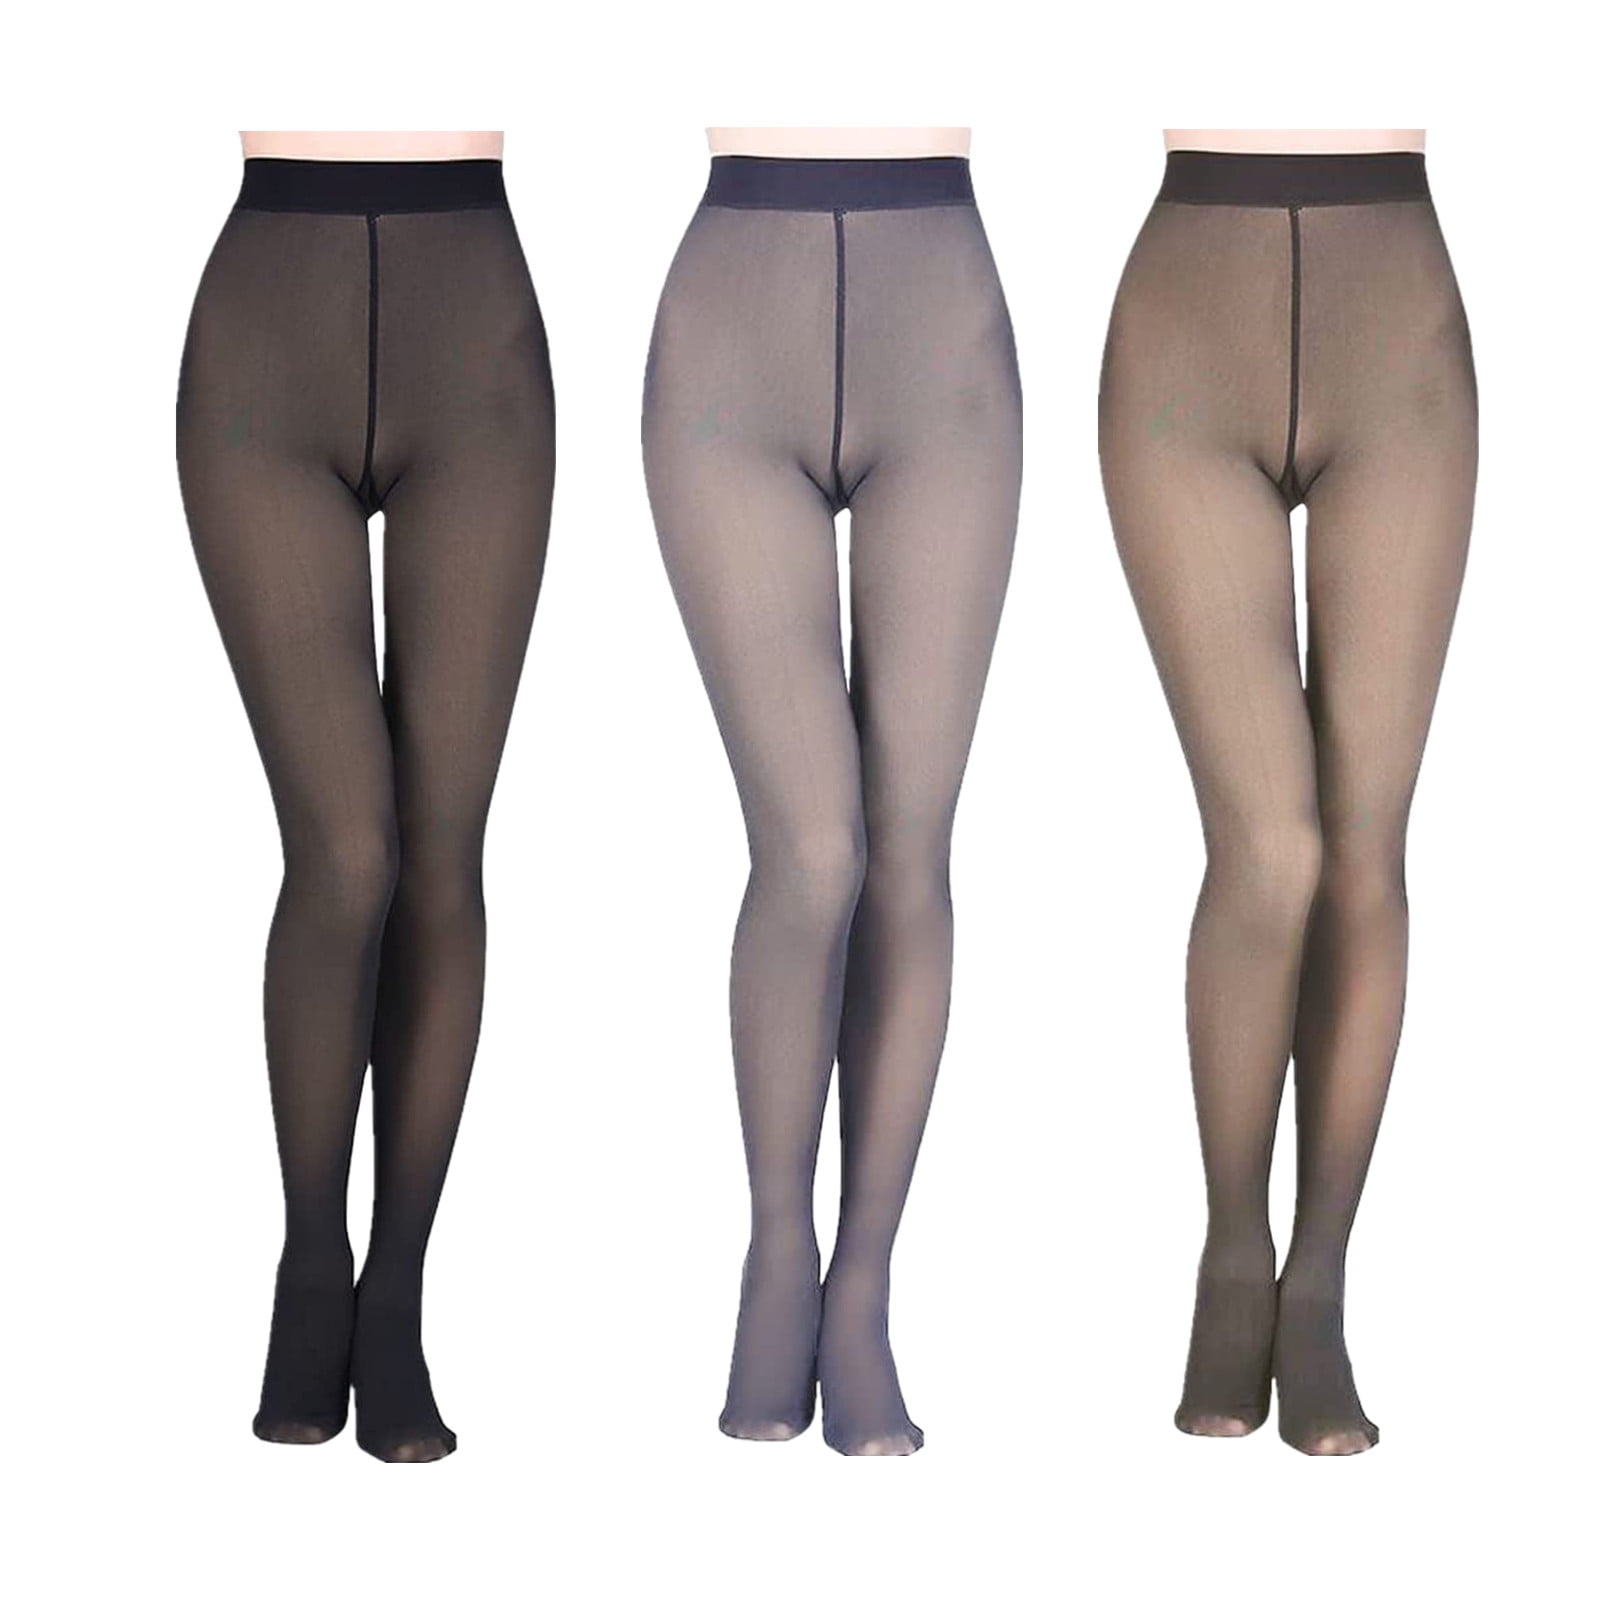 Buy ALAXENDER Fleece Lined Tights Women Warm Fake Translucent